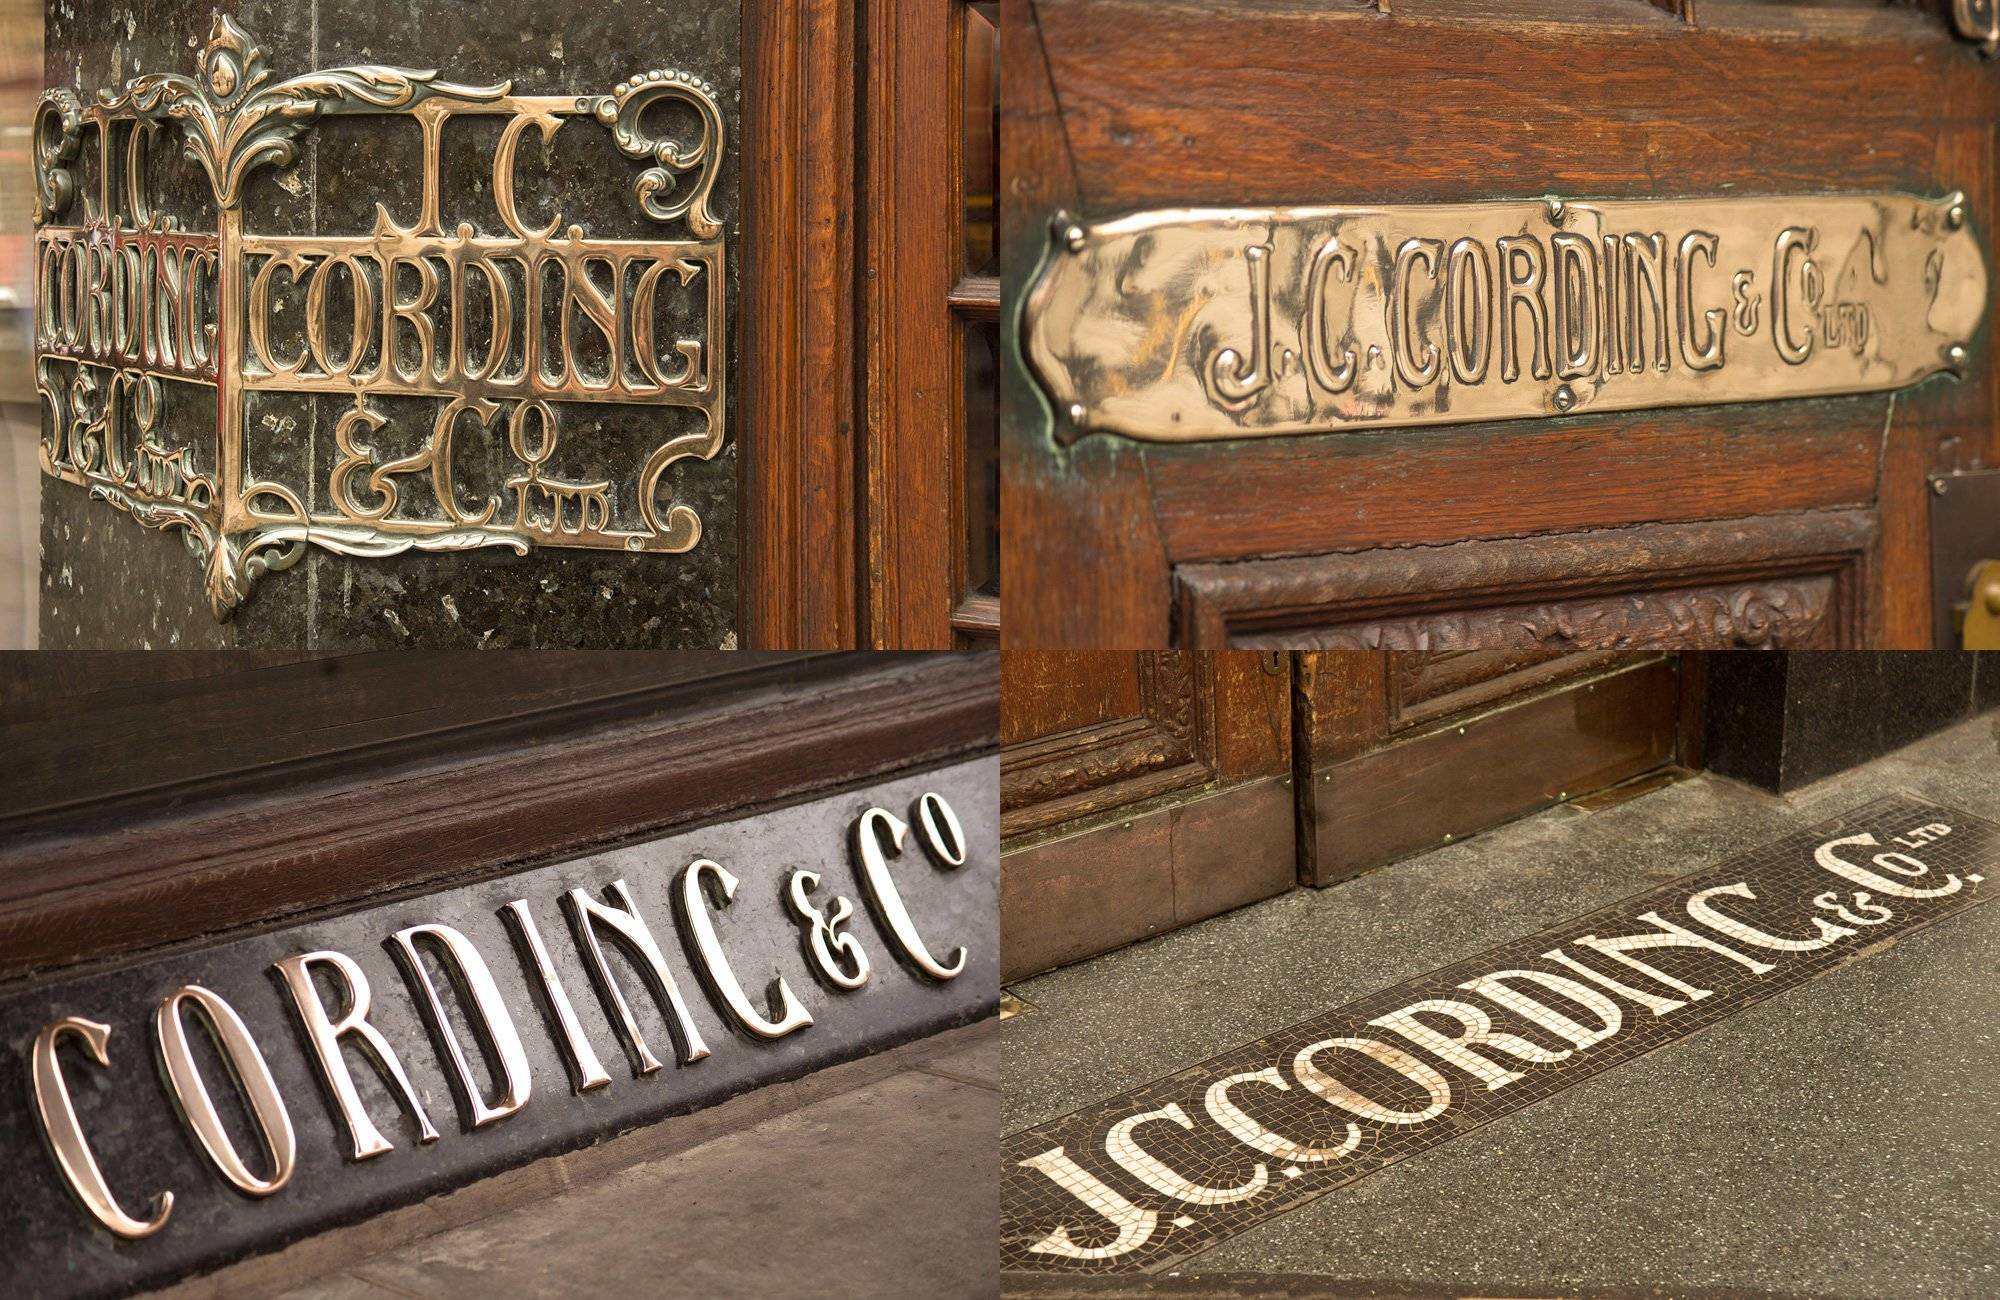 Edwardian signs on the exterior of Cordings